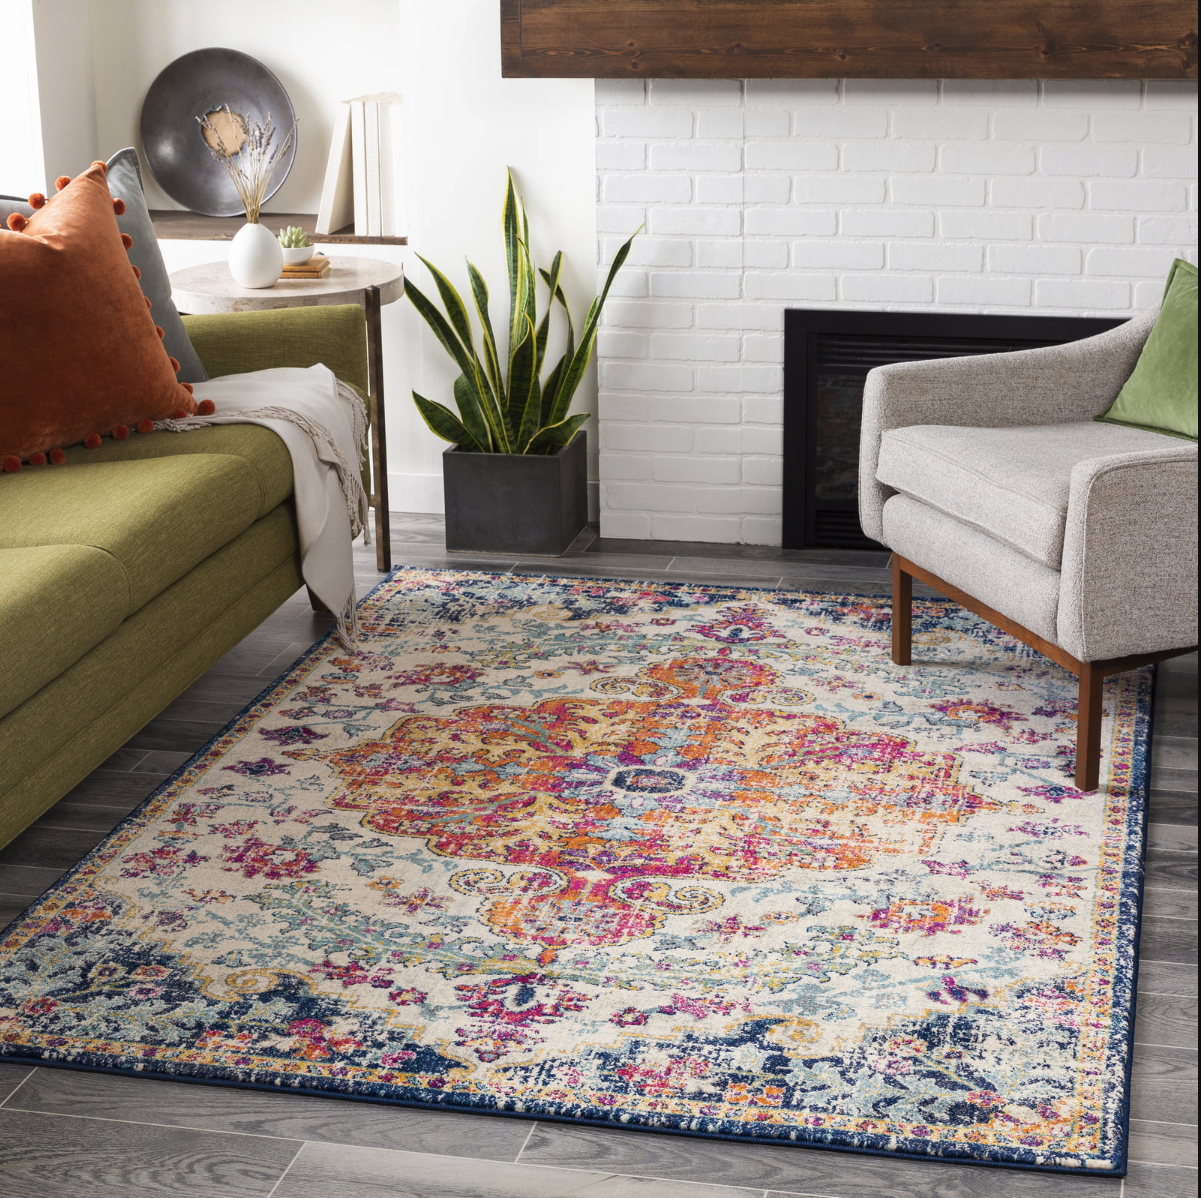 The 11 Best Entryway Rugs of 2023